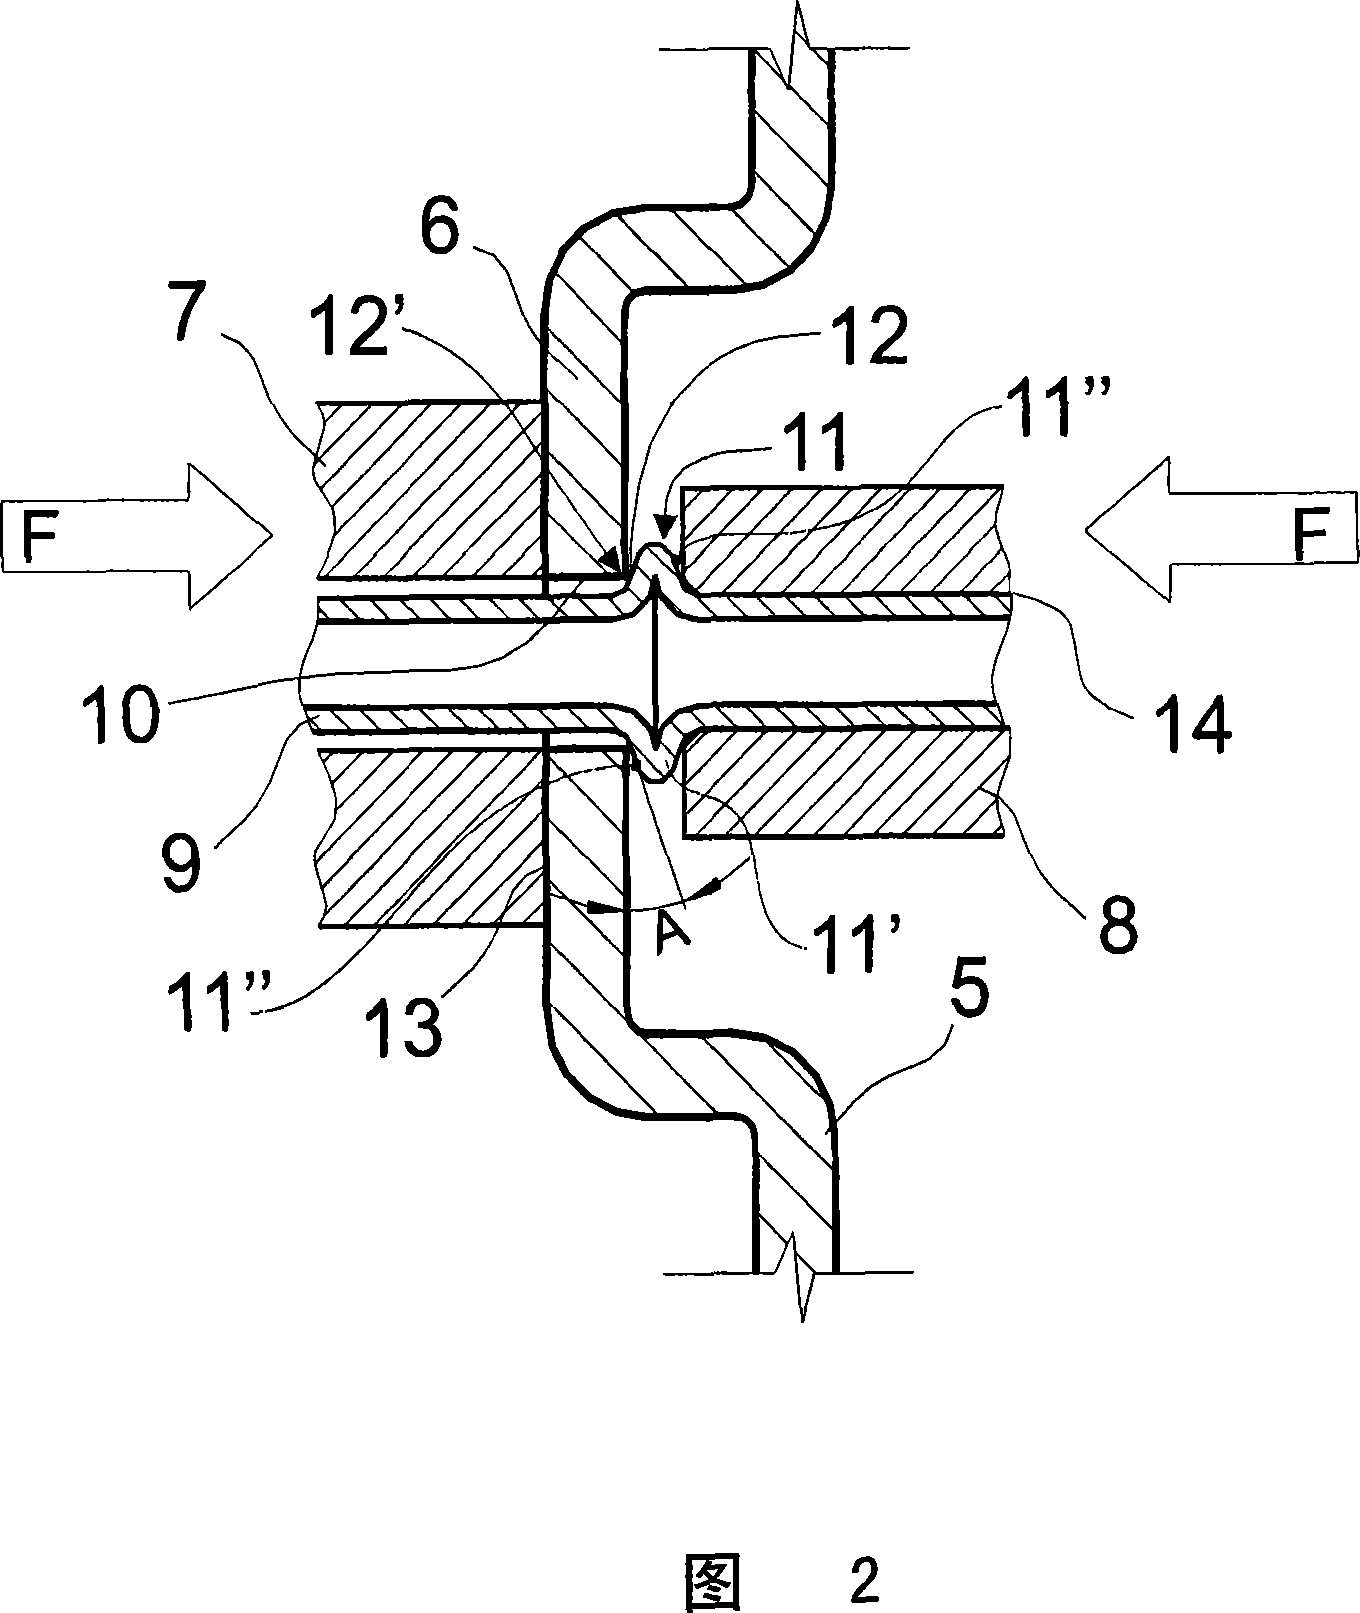 A compressor and method for welding a fluid tubing to a compressor housing and fluid-transporting tubing